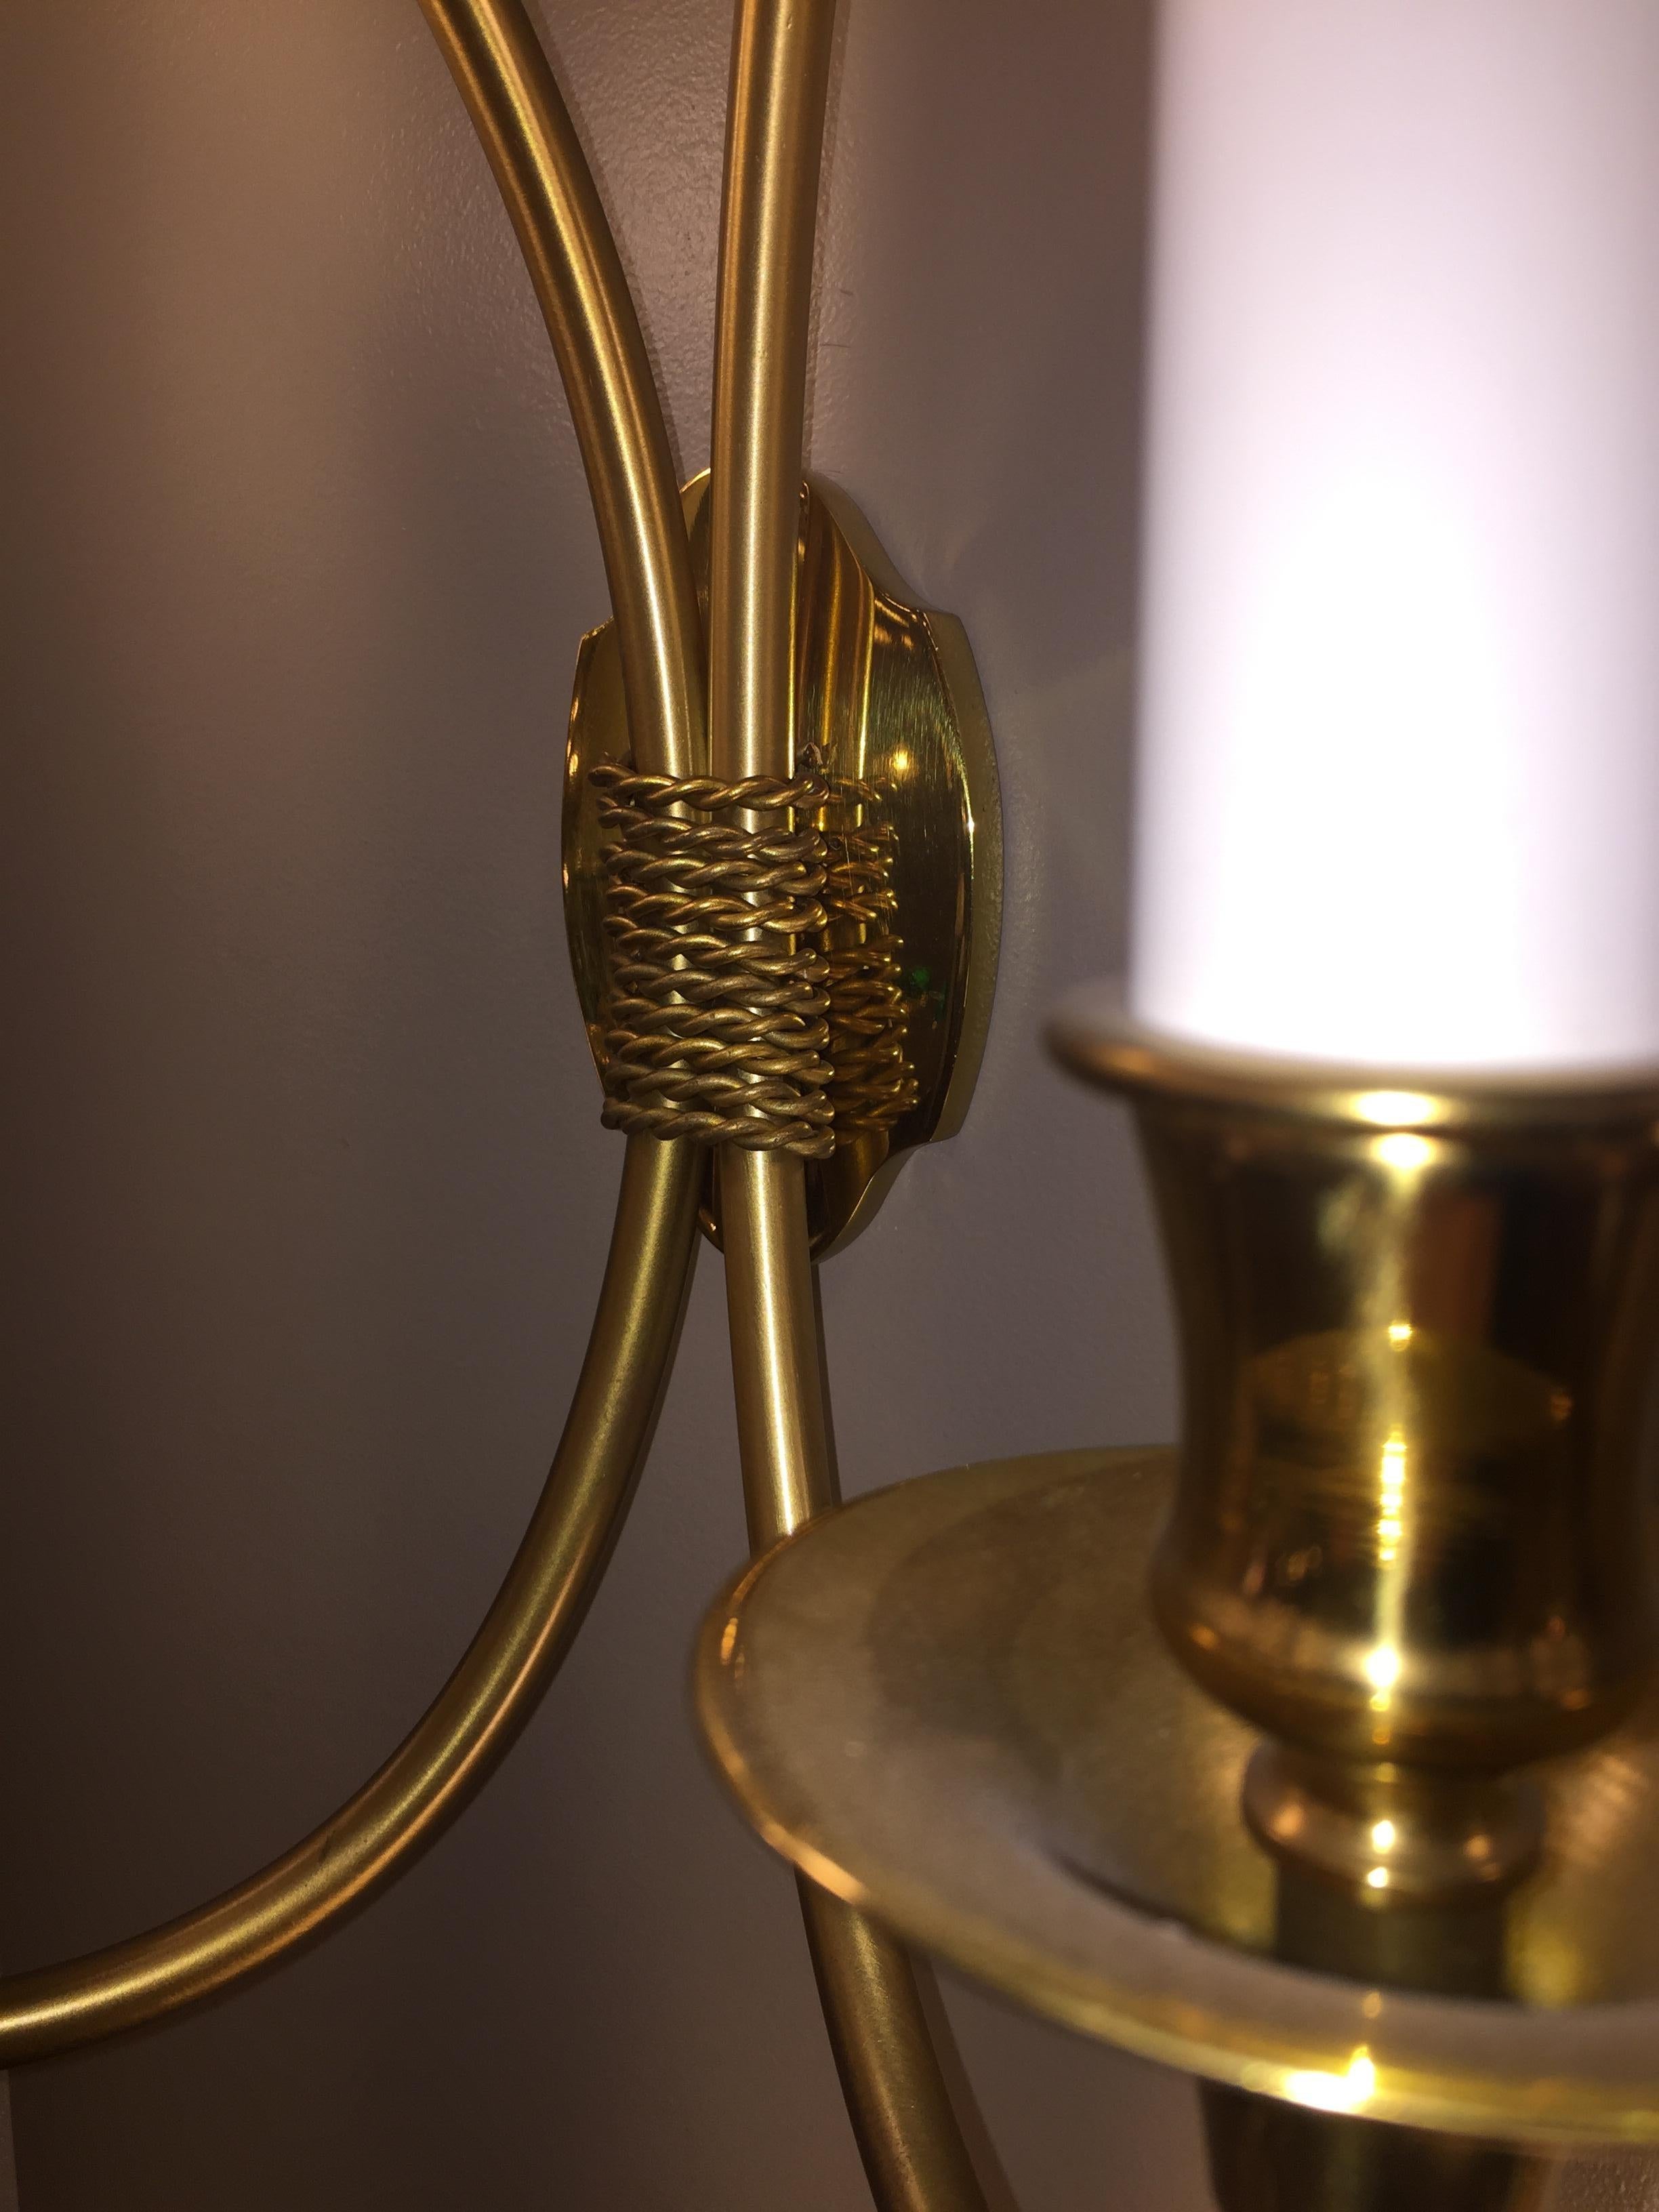 Wall lamp with a style purified and luminous.